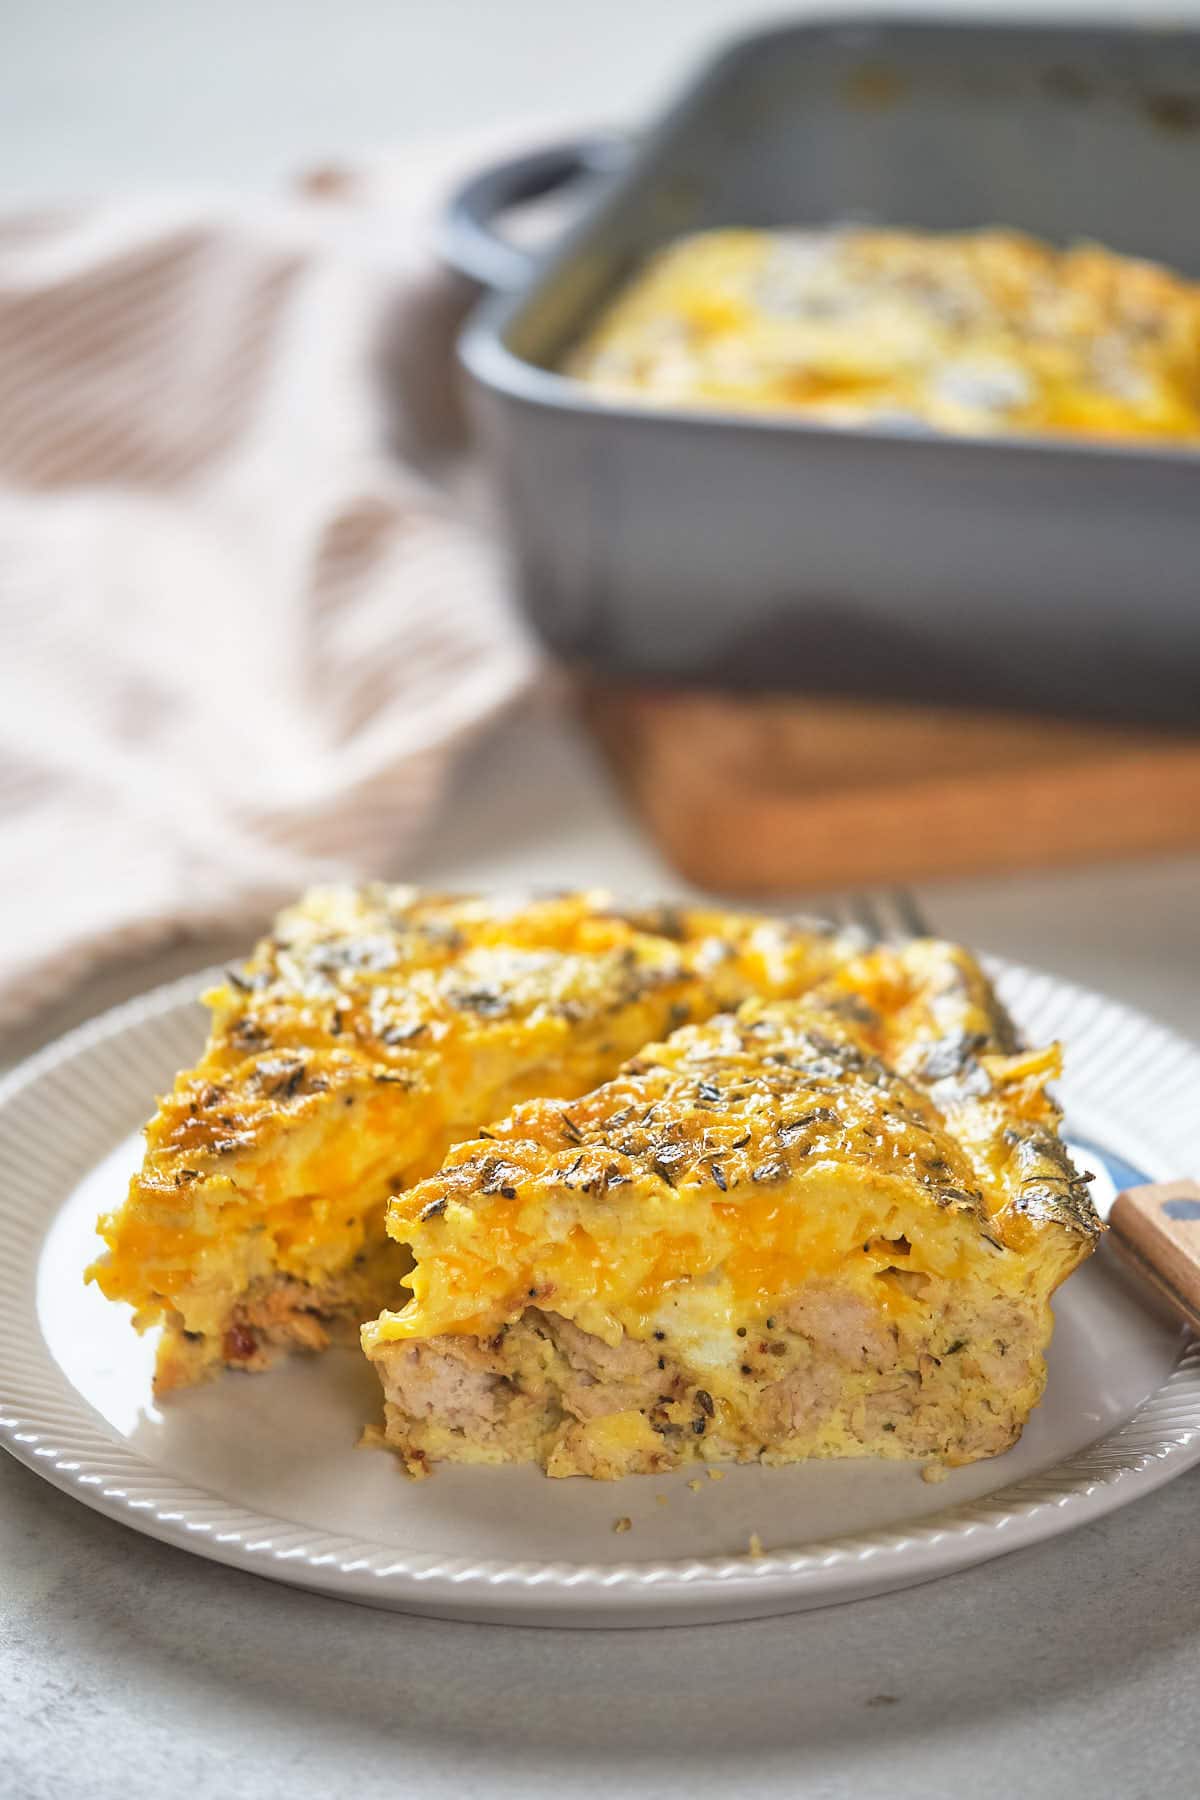 A plate with two servings of egg casserole containing vegetables and meat.